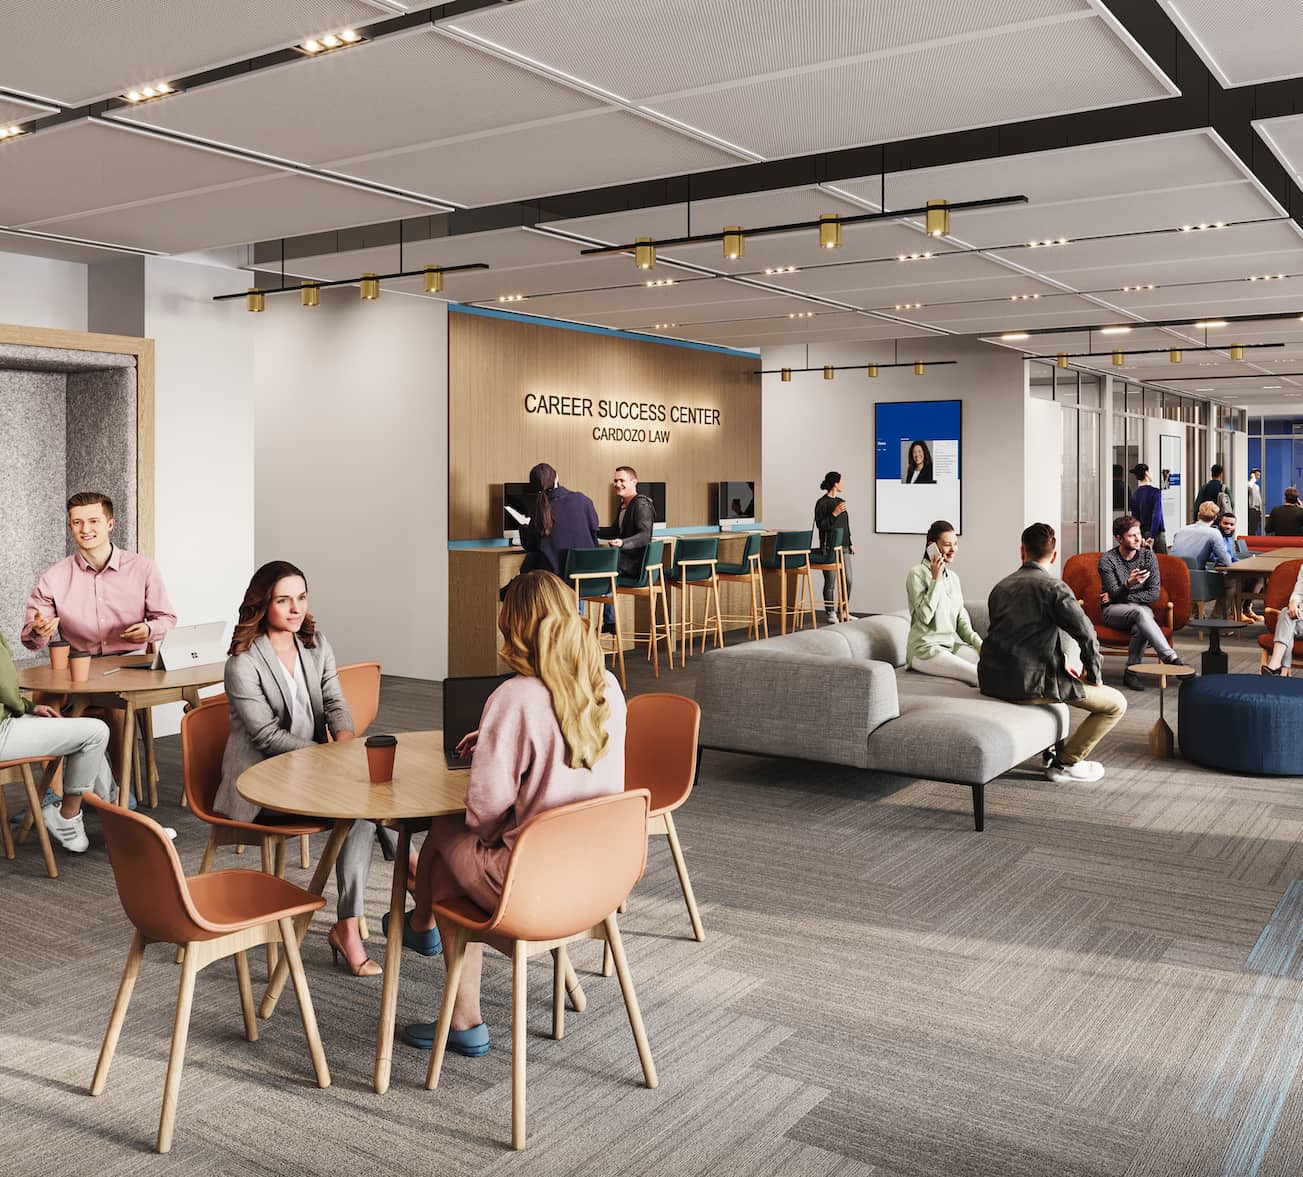 architectural rendering shows people sitting and talking in a career services center at the university